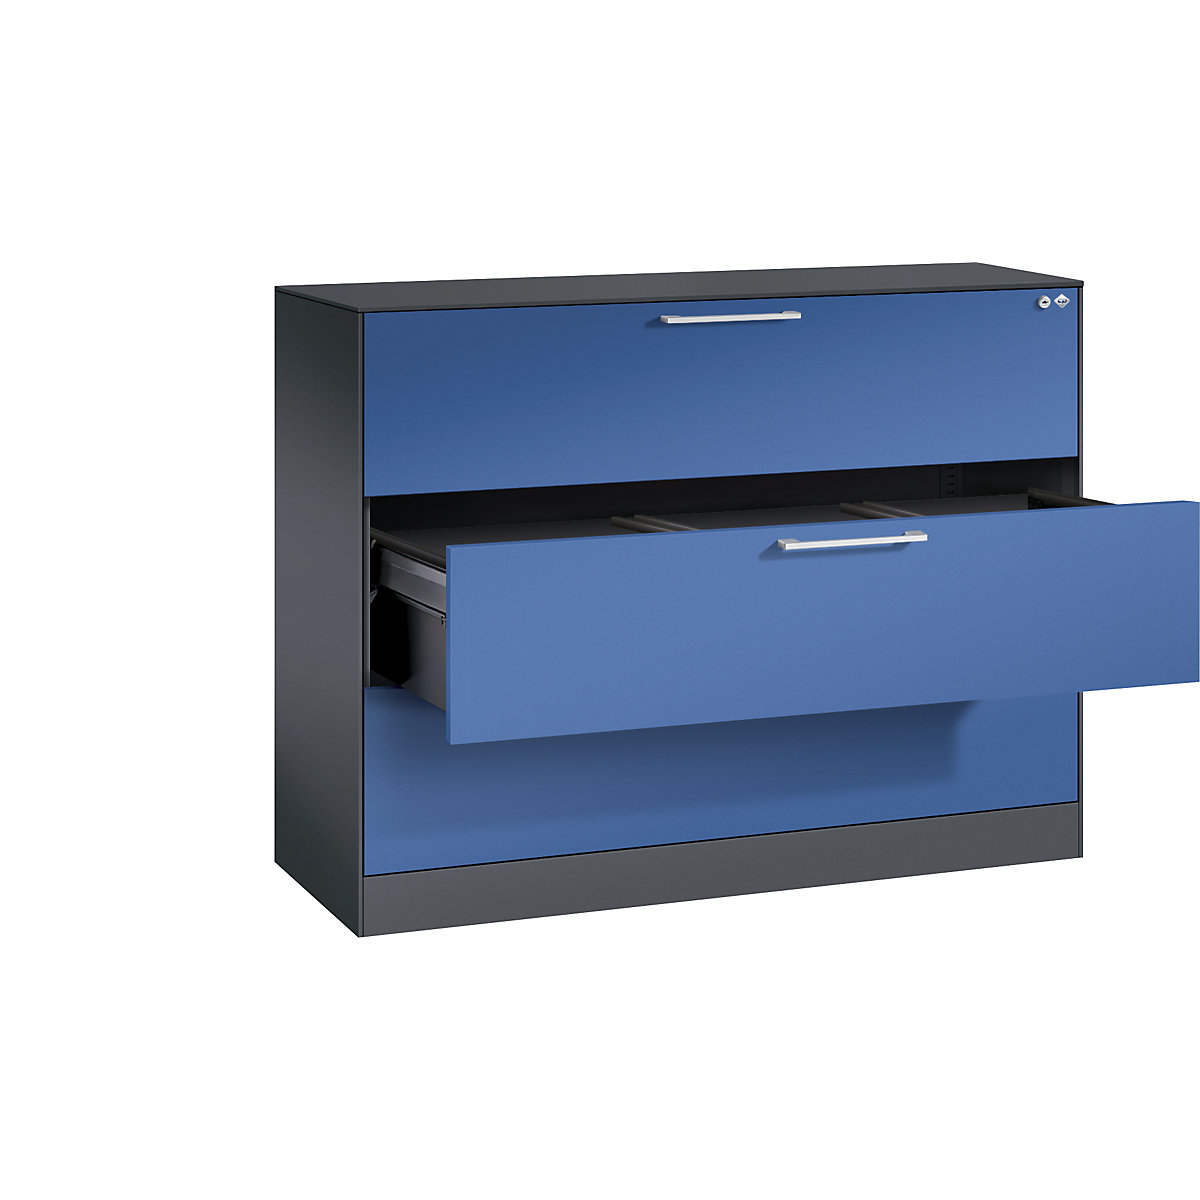 ASISTO suspension filing cabinet – C+P, width 1200 mm, with 3 drawers, black grey/gentian blue-5